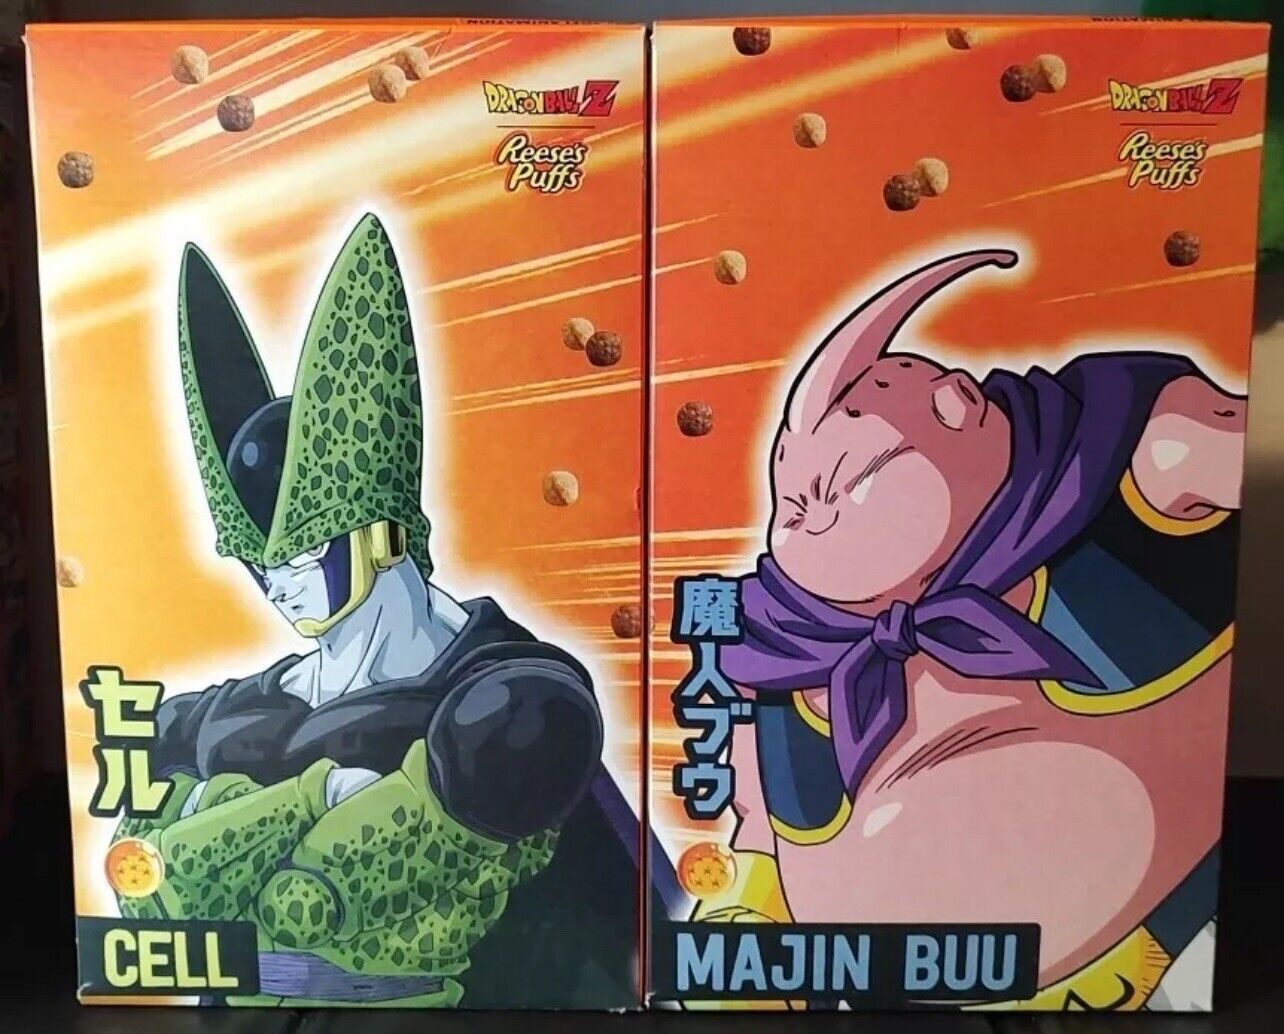 NEW Dragon Ball Z Reese Puffs Cereal Limited Edition Sealed Box Majin Buu & Cell